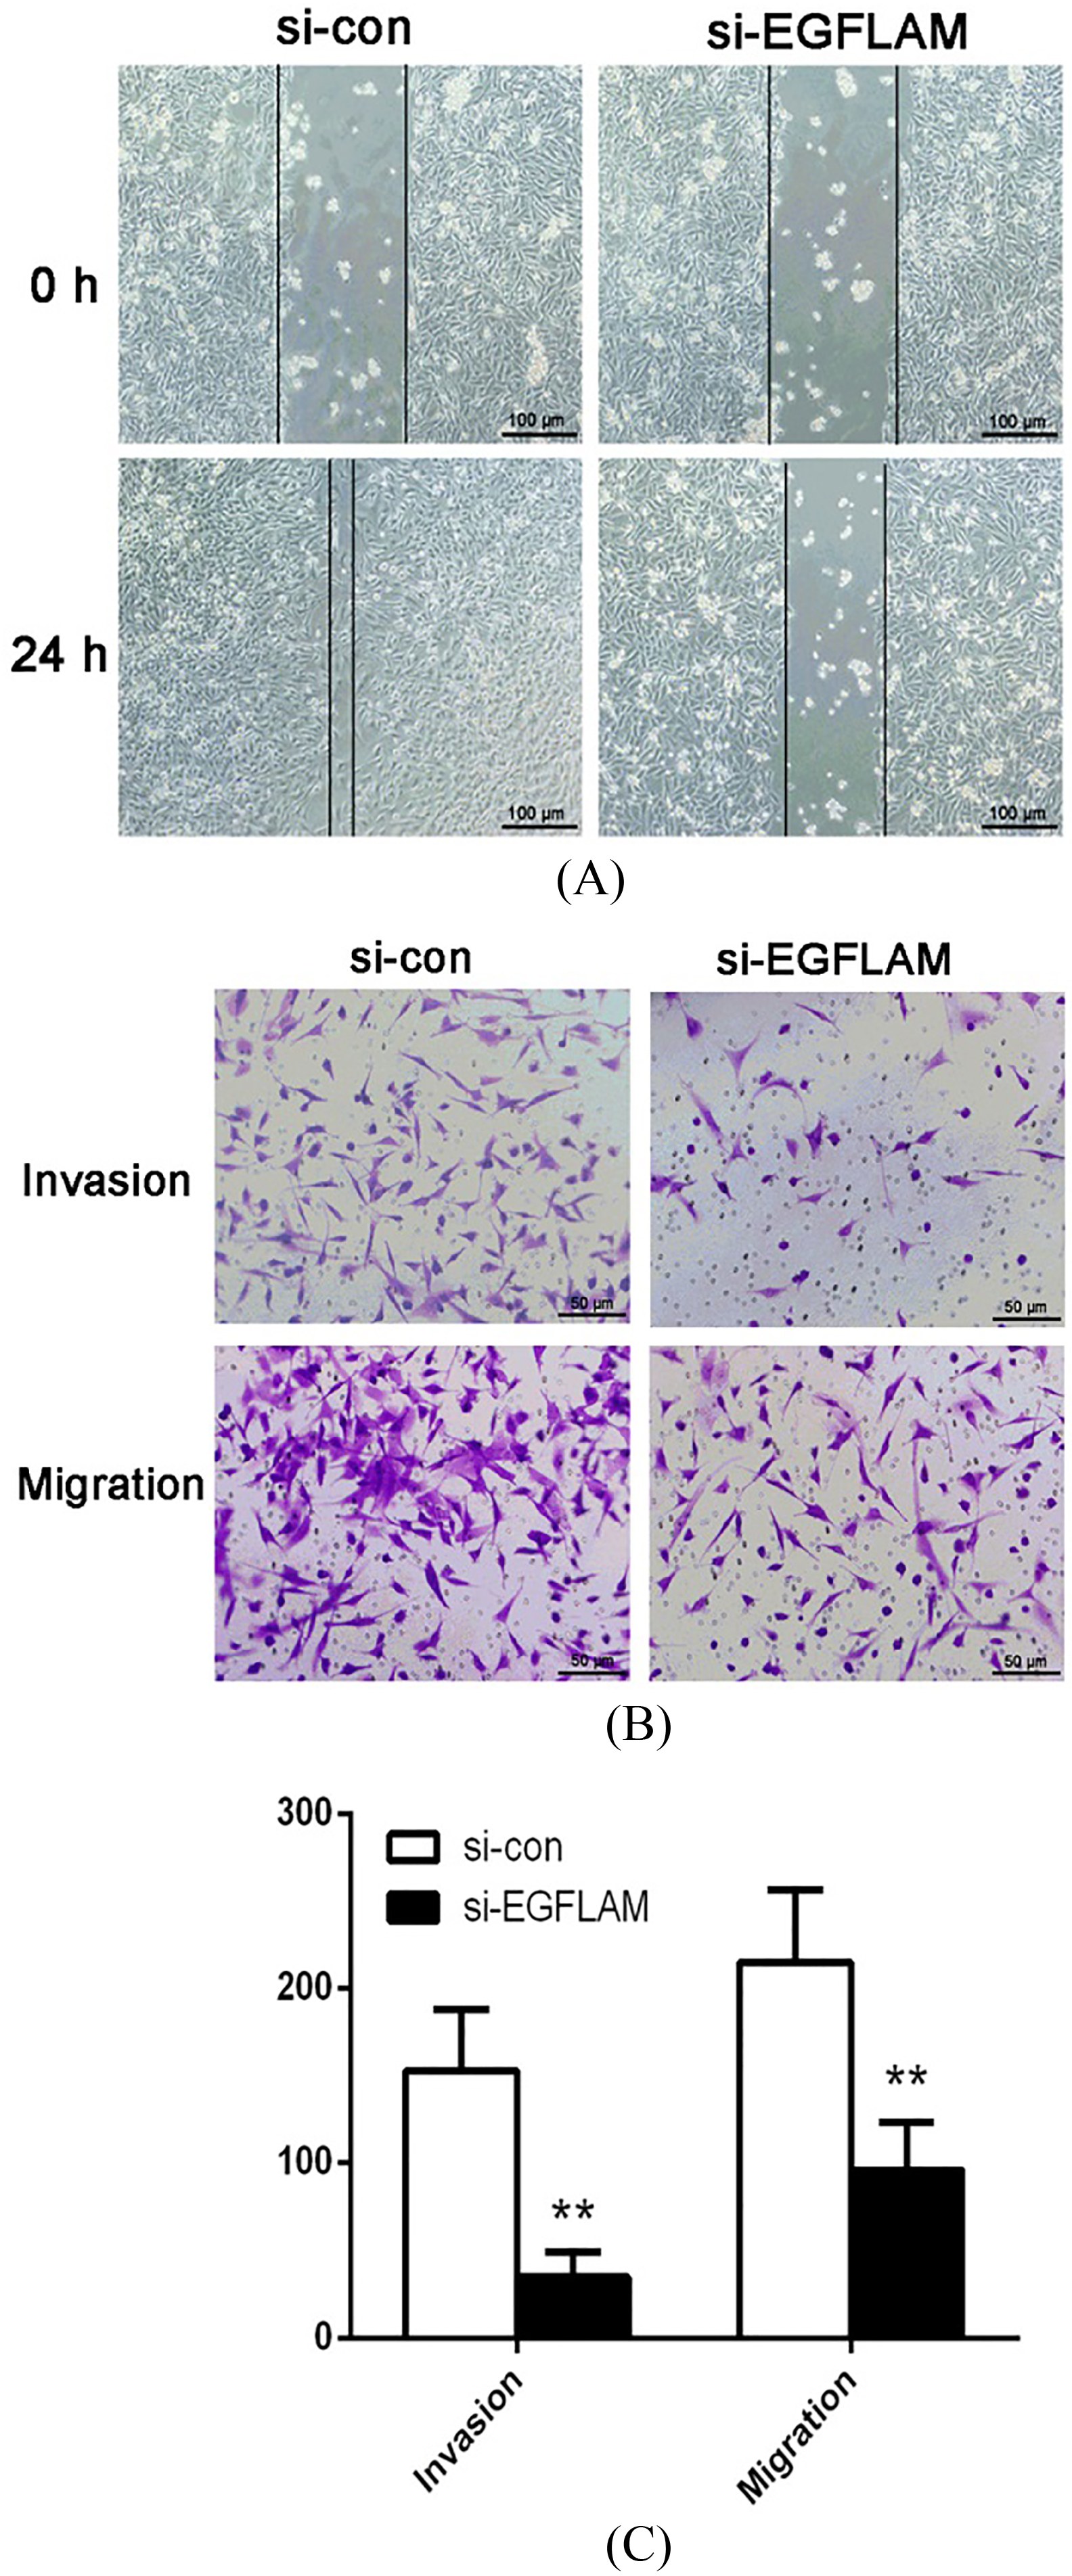 EGFLAM promoted the migration and invasion of U87 cells. (A) Wound healing assay revealed that knockdown of EGFLAM inhibited the migration of U87 cells (Original magnification × 100). (B) Transwell assays showed that knockdown of EGFLAM significantly suppressed the migration and invasion of U87 cells (Original magnification × 200). si-EGFLAM group represents EGFLAM in U87 cells were silenced, and si-con group represents EGFLAM in U87 cells were not silenced. **p< 0.01 versus si-con group.